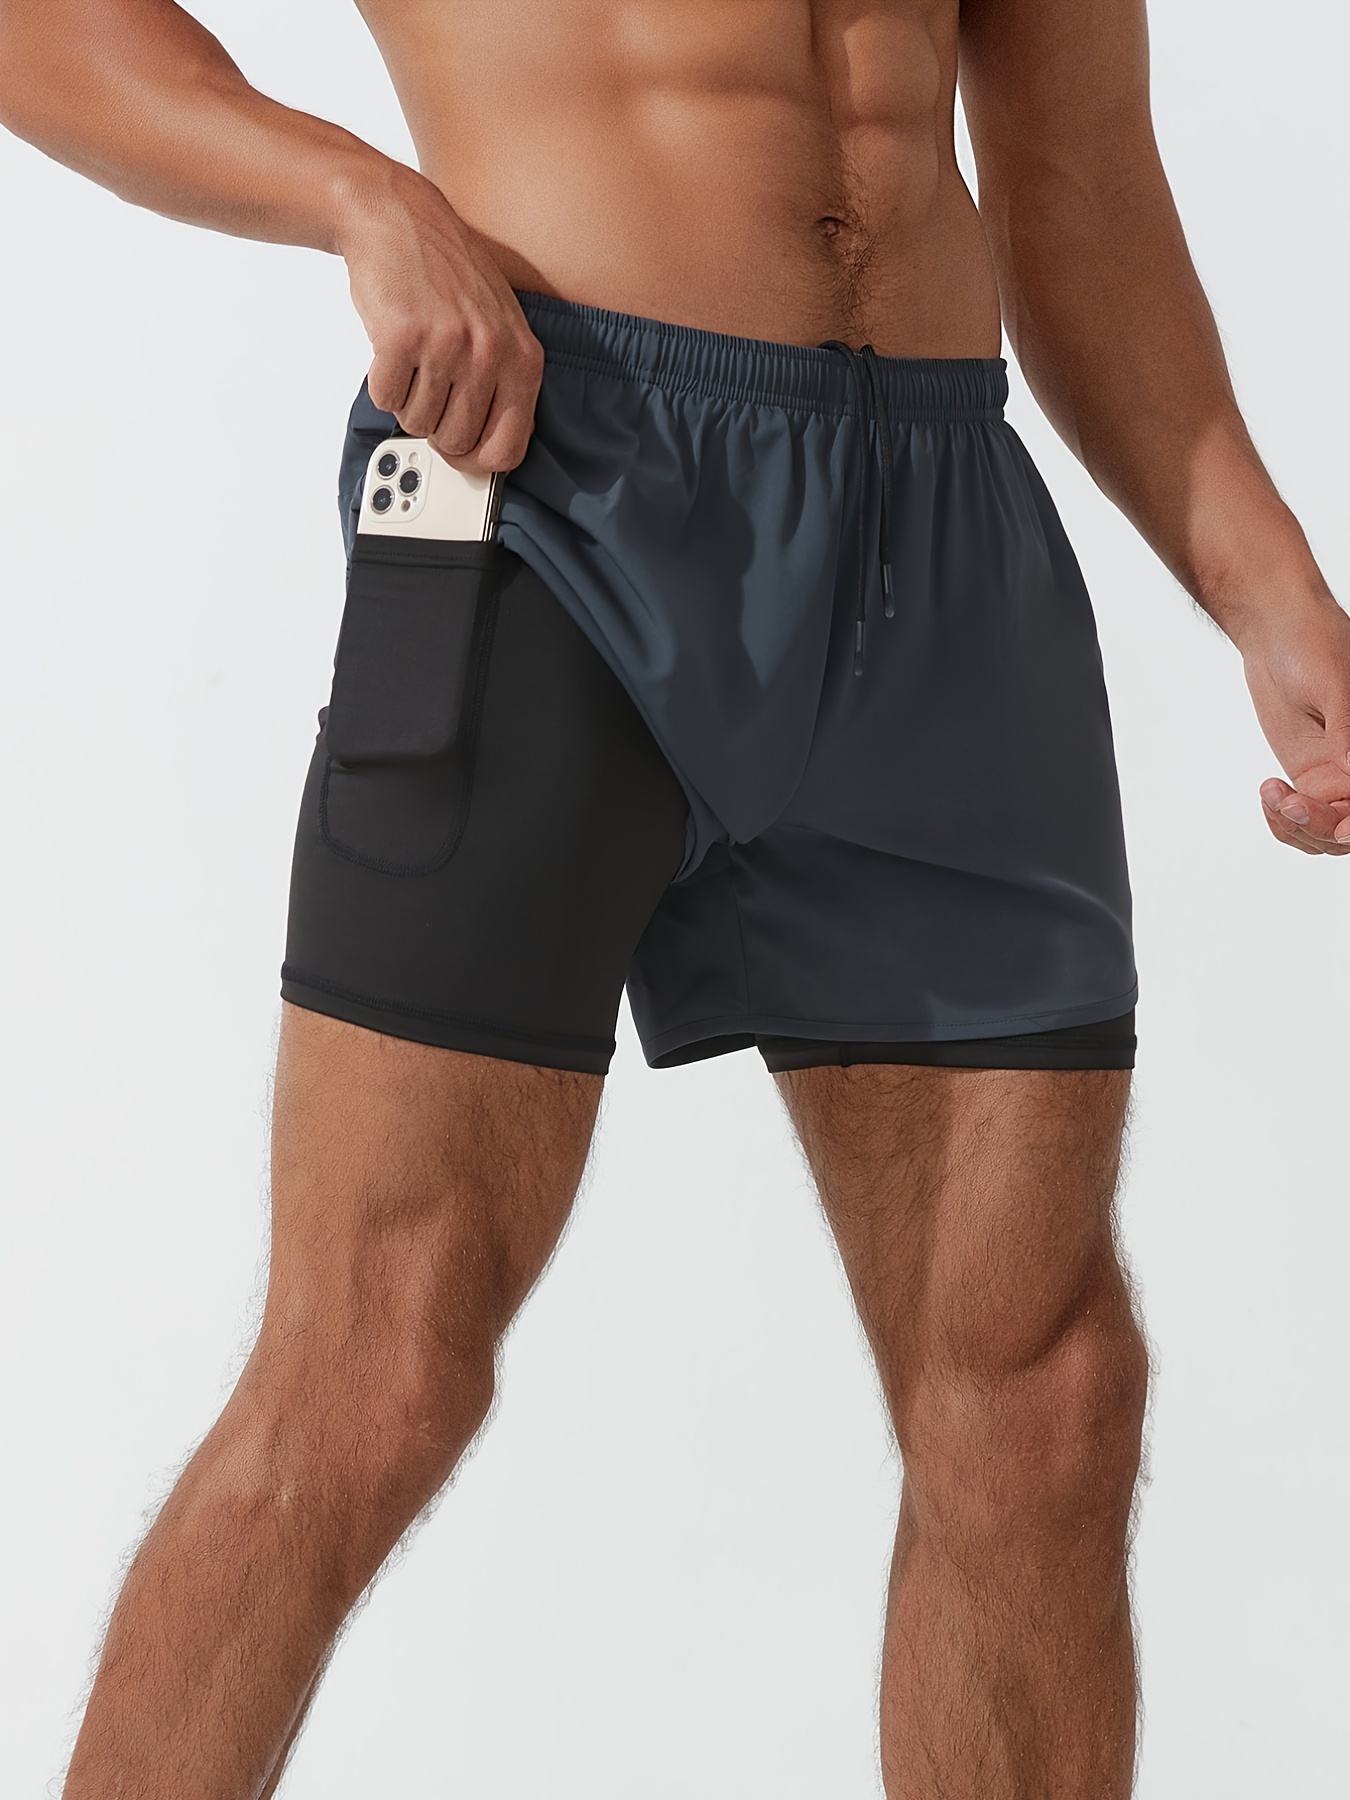 Men's 1 Running Shorts Quick Dry Gym Athletic Workout Shorts